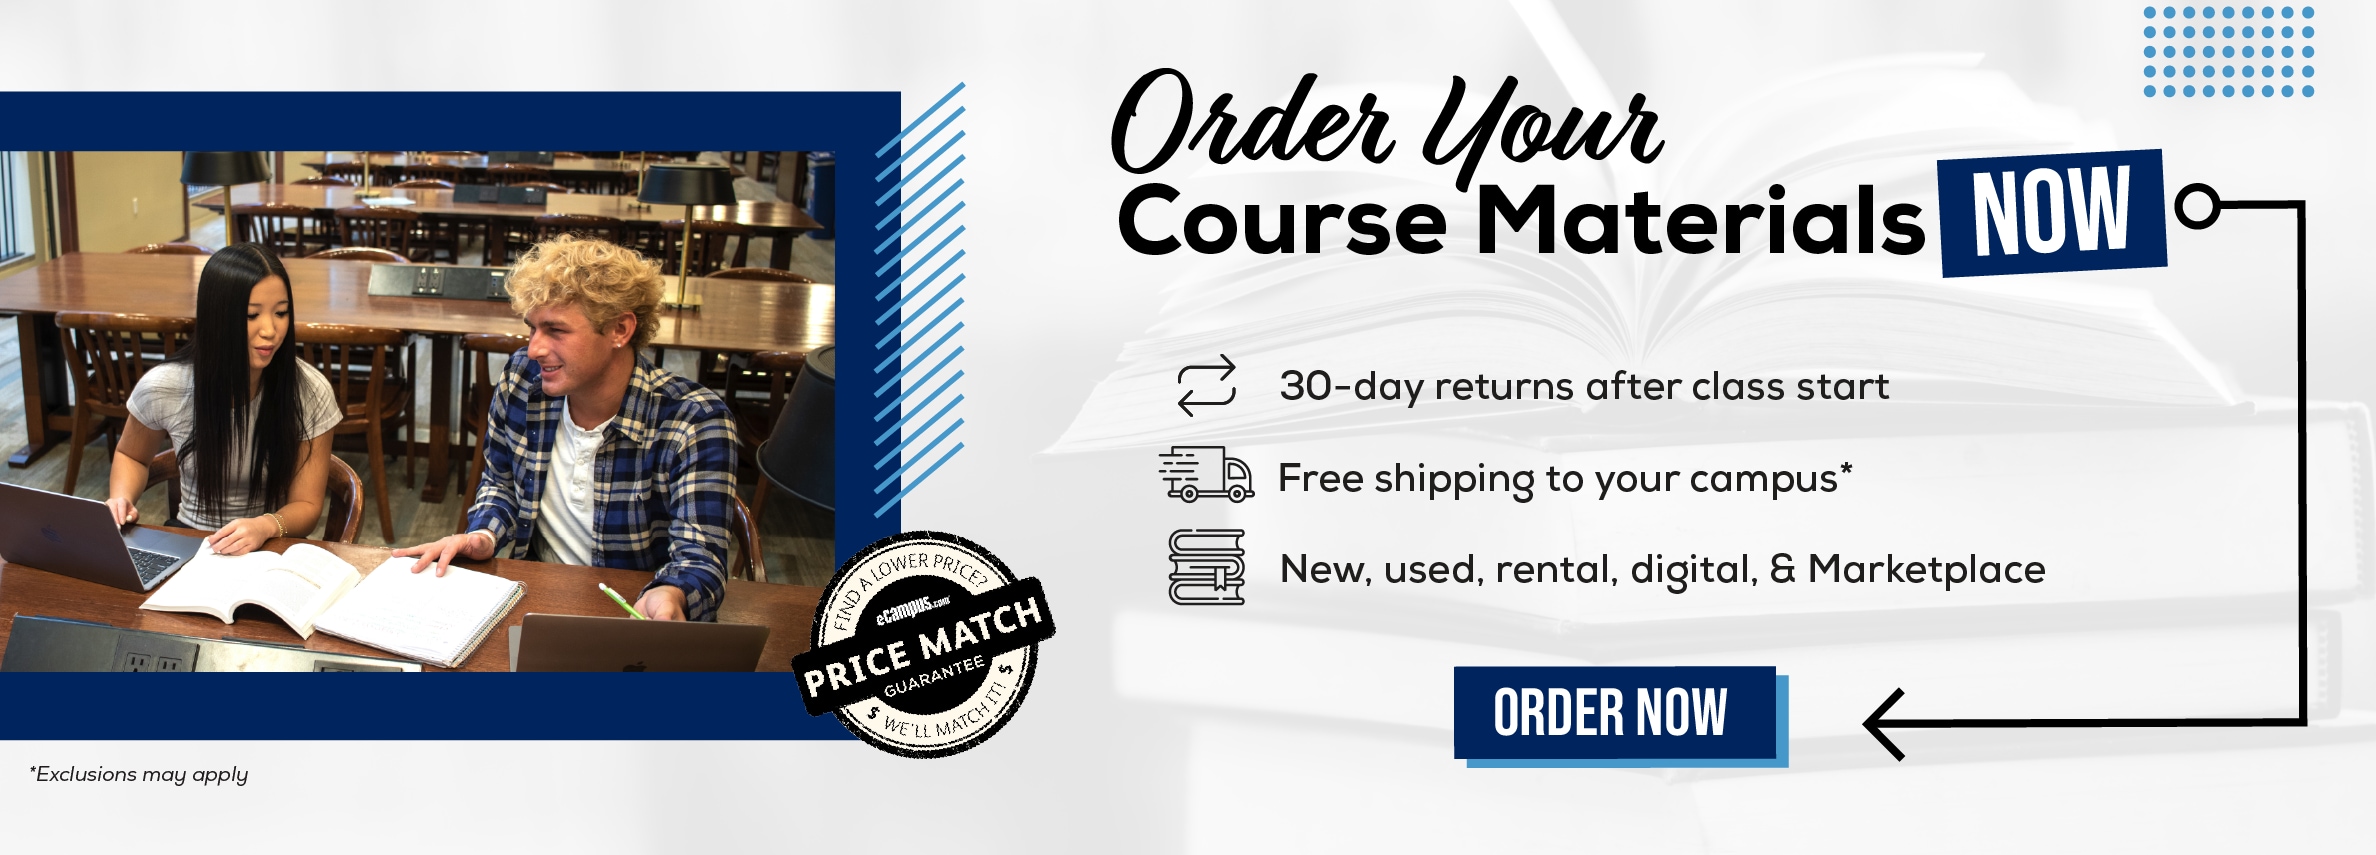 Order Your Course Materials Now. 30-day returns after class start. Free shipping to your campus* New, used, rental, digital, & Marketplace. Order now. *Exclusions may apply.